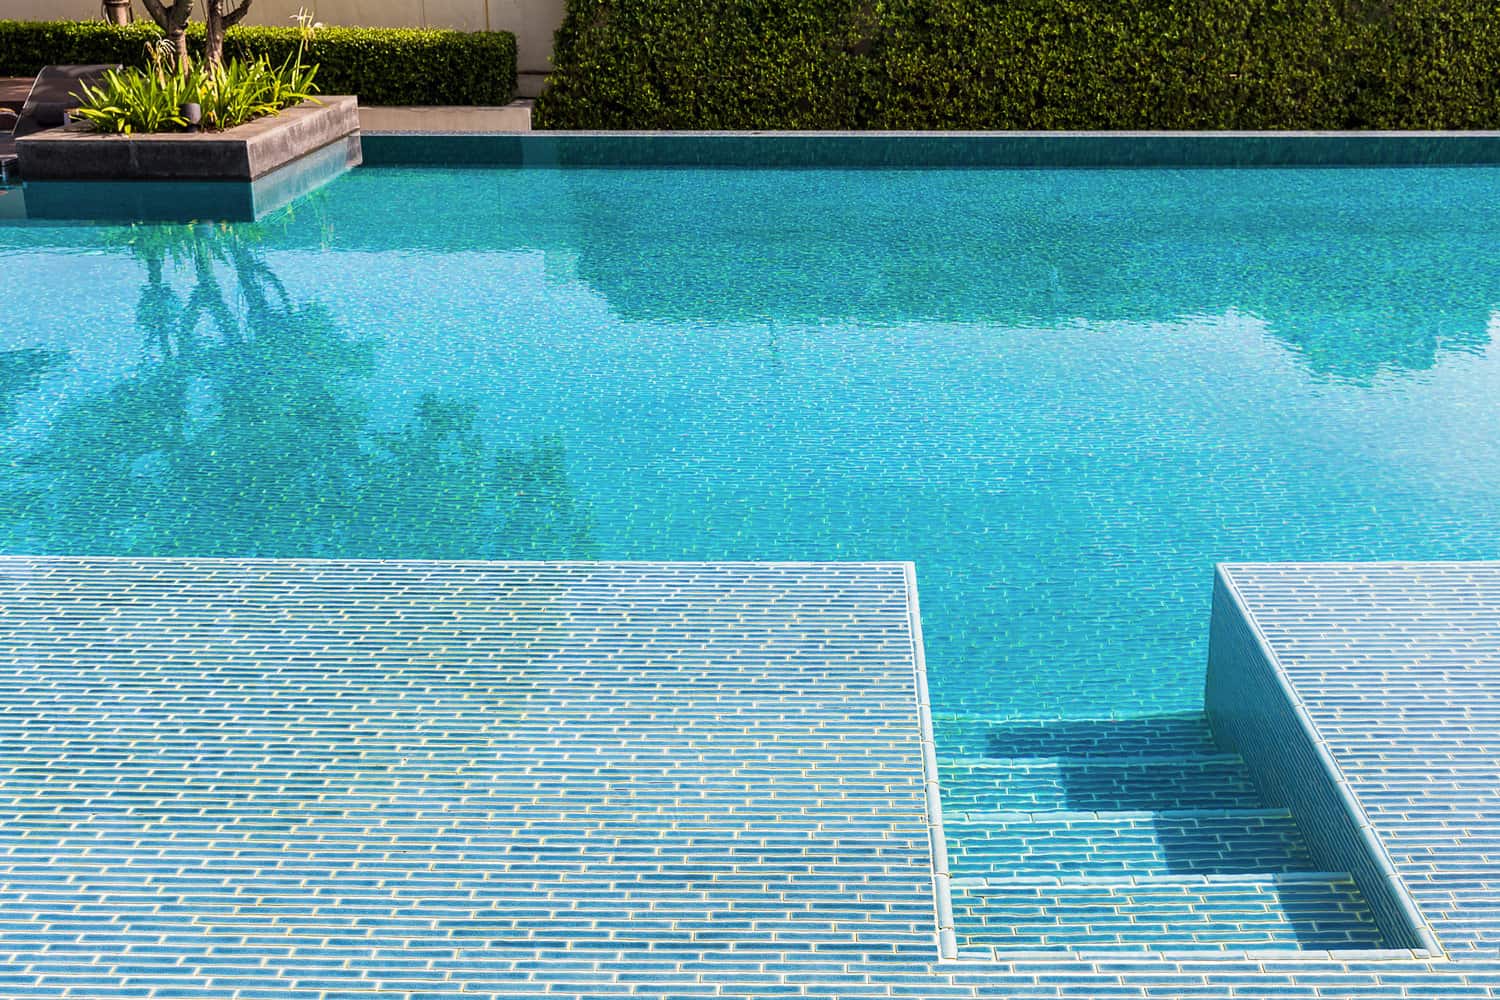 Swimming pool made by mosaic tiles with small stairs inside the clear blue water which not moving. Water surface reflects shadow of sky, tree and bush in far background.